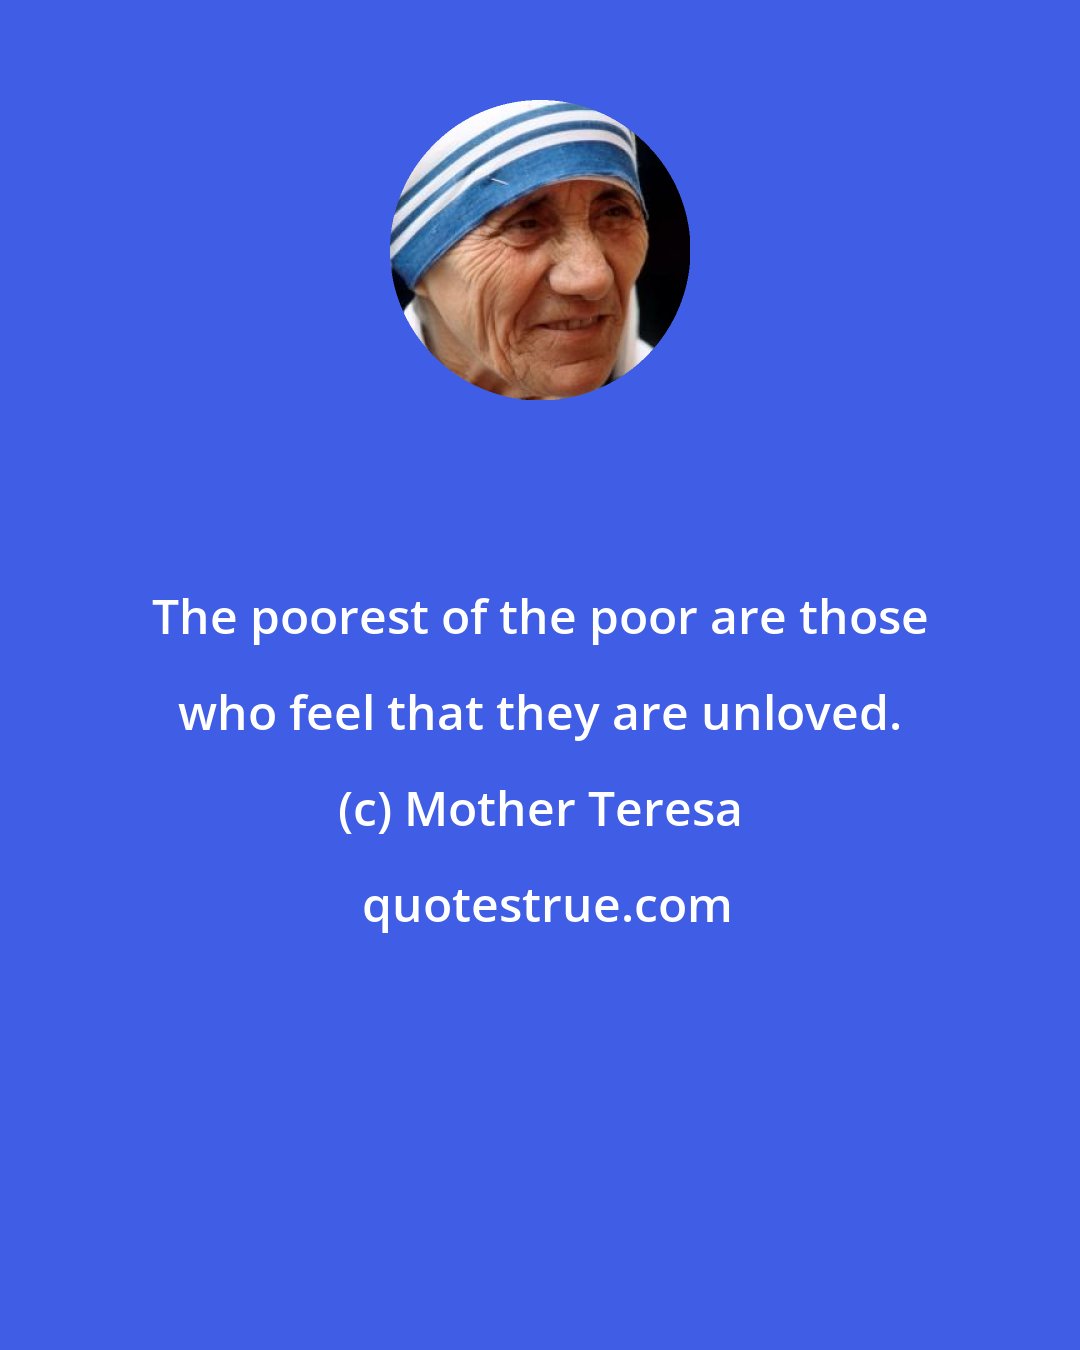 Mother Teresa: The poorest of the poor are those who feel that they are unloved.